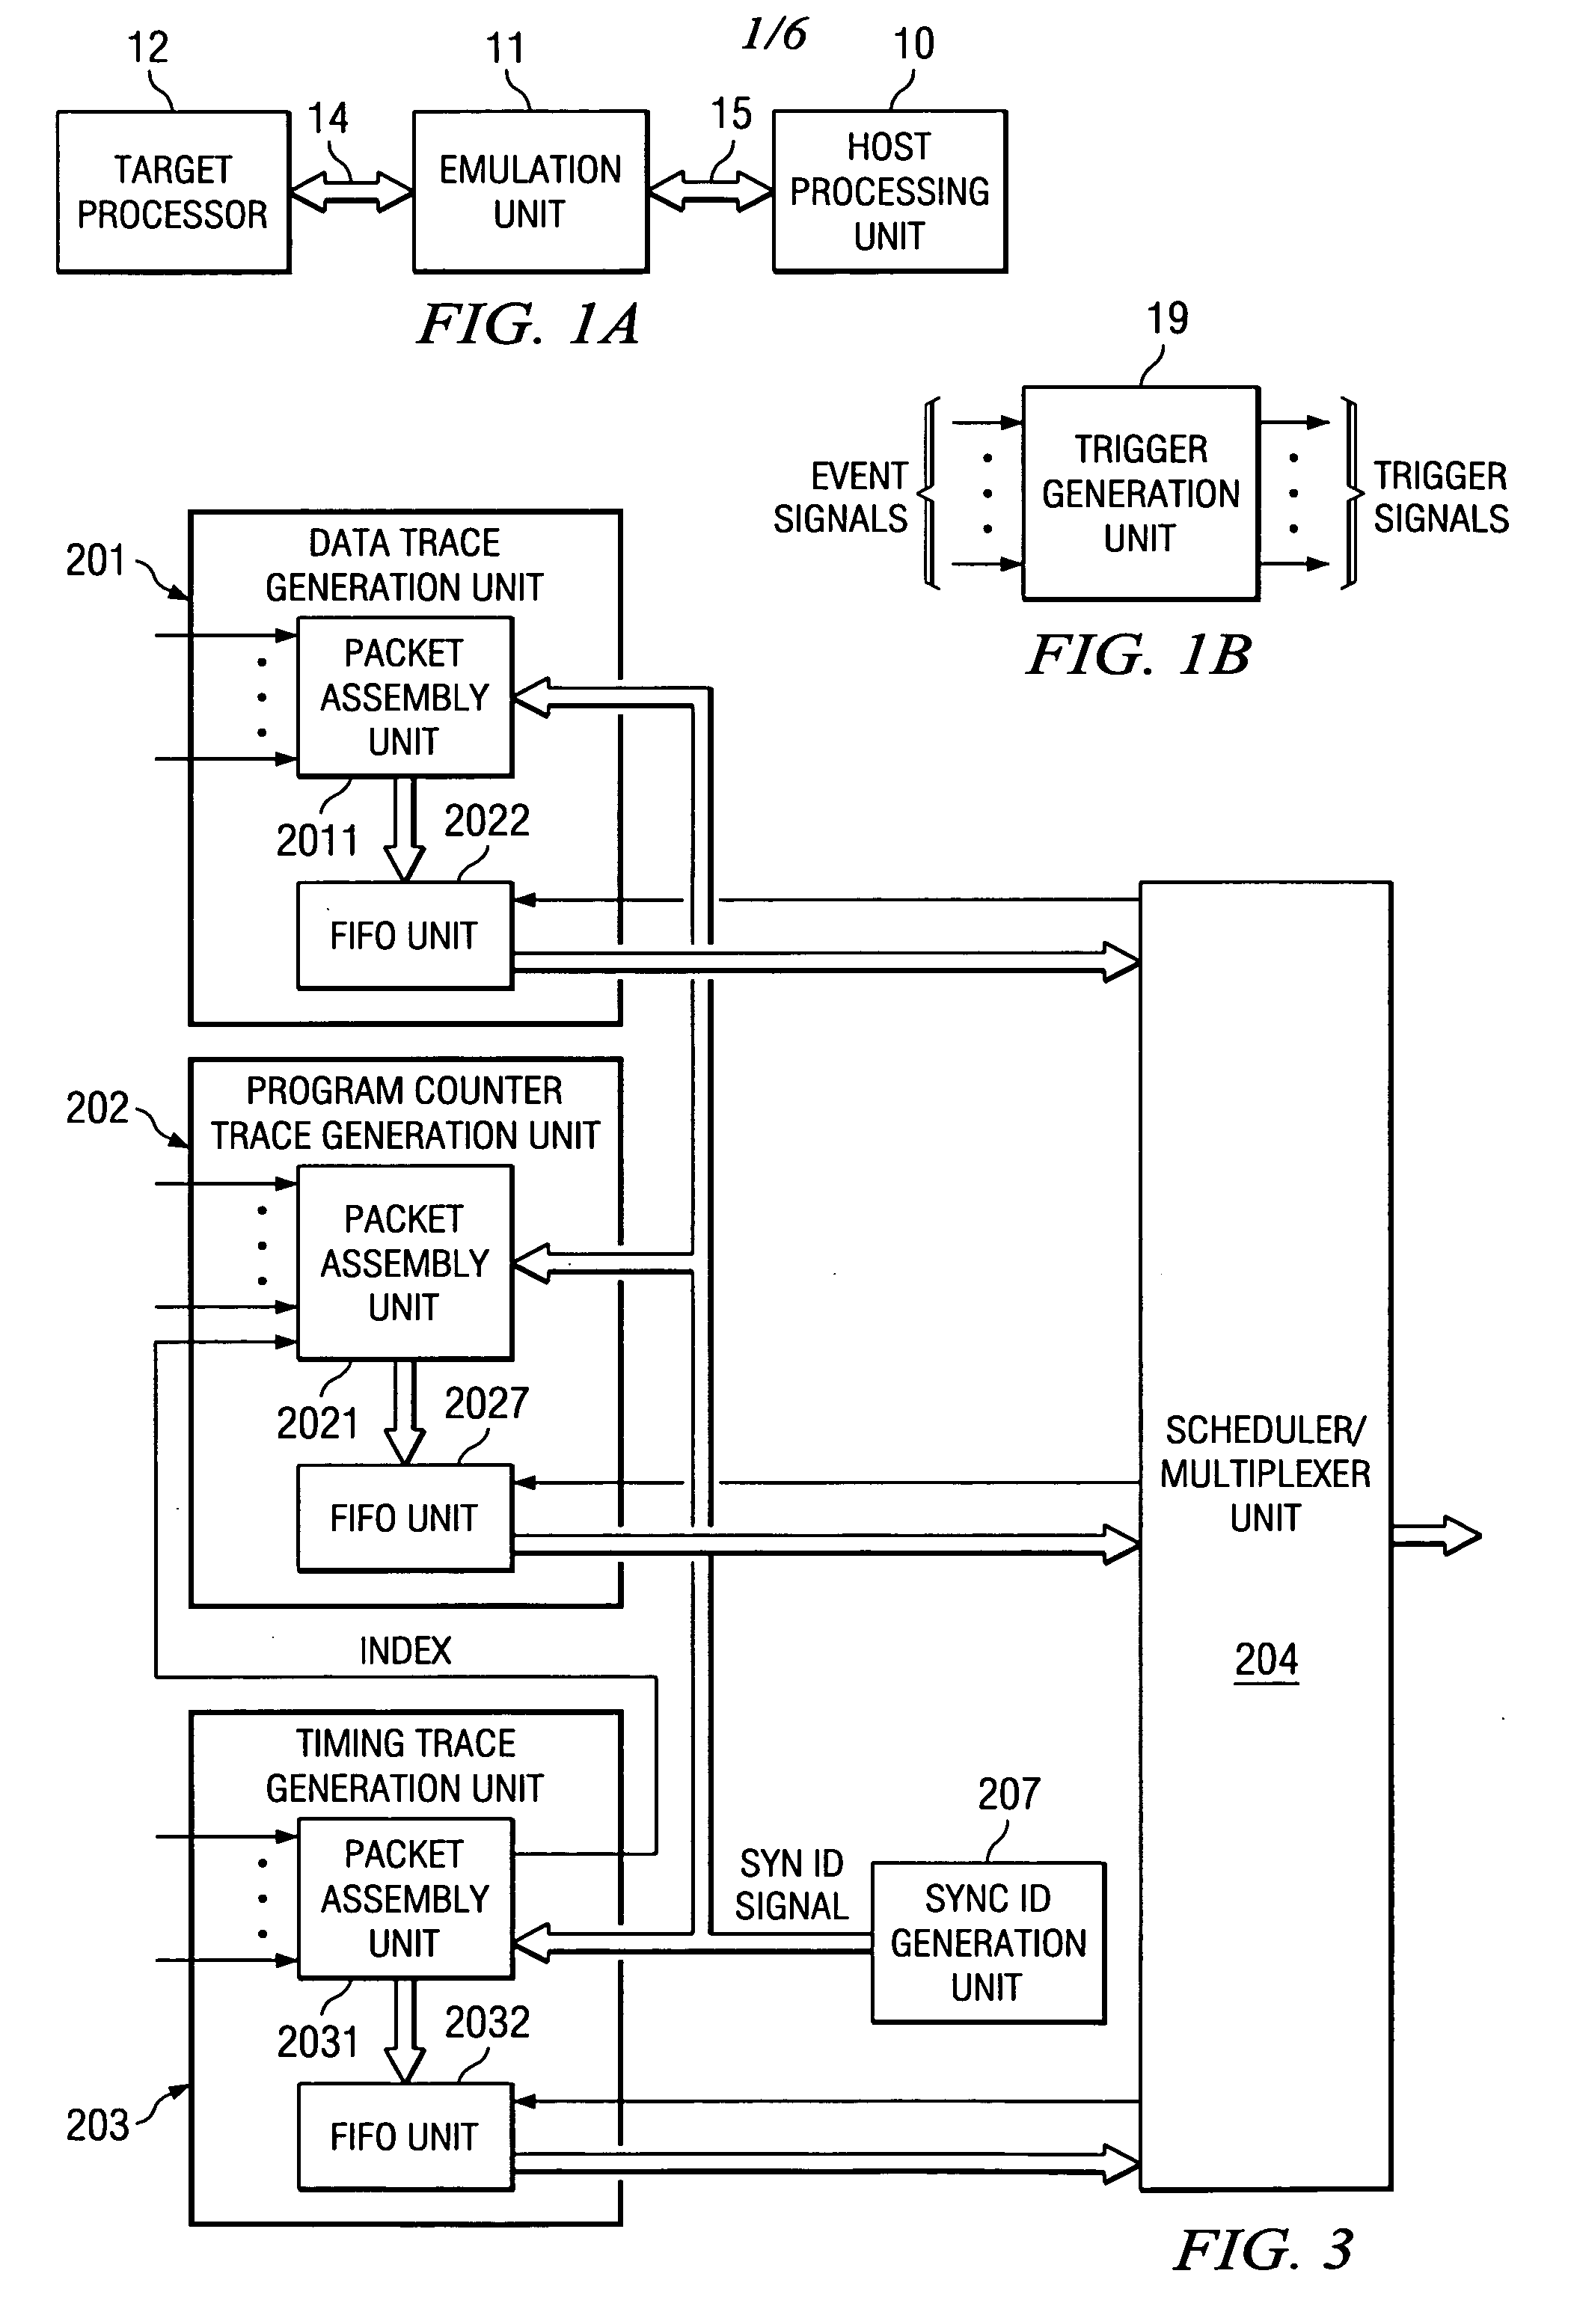 Apparatus and method for trace stream identification of multiple target processor events